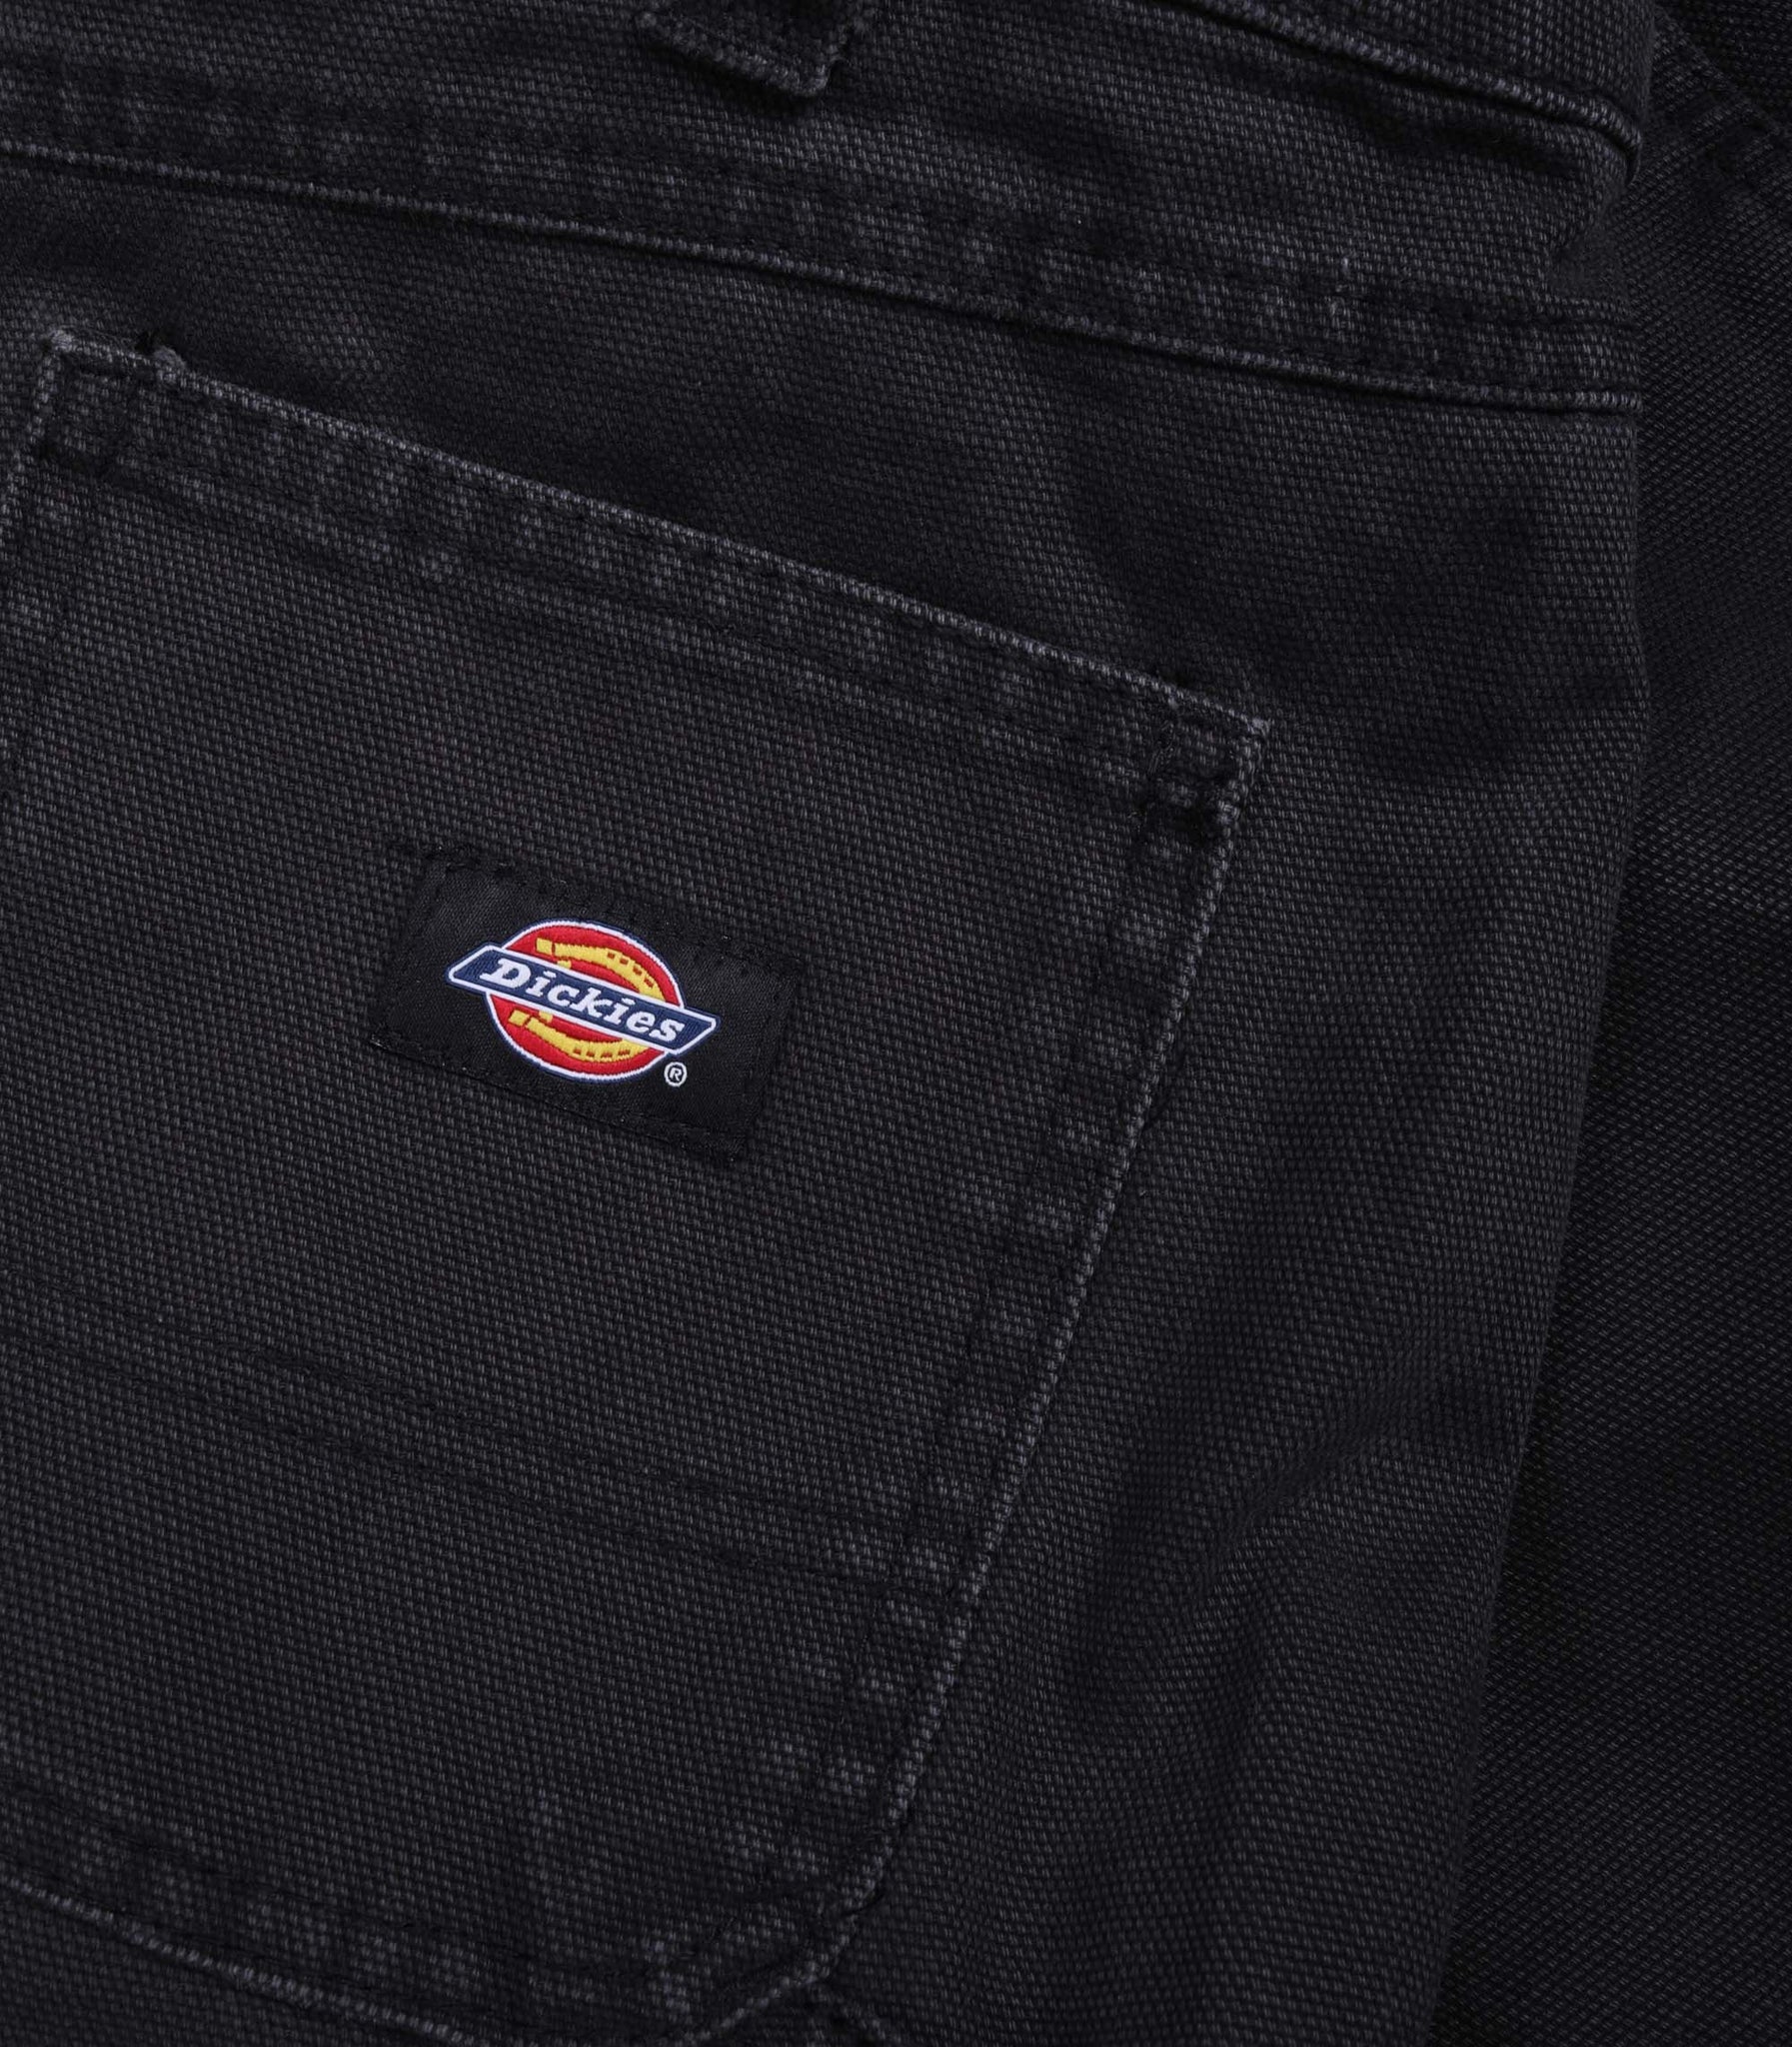 Dickies Duck Canvas Short W Stone Washed Black